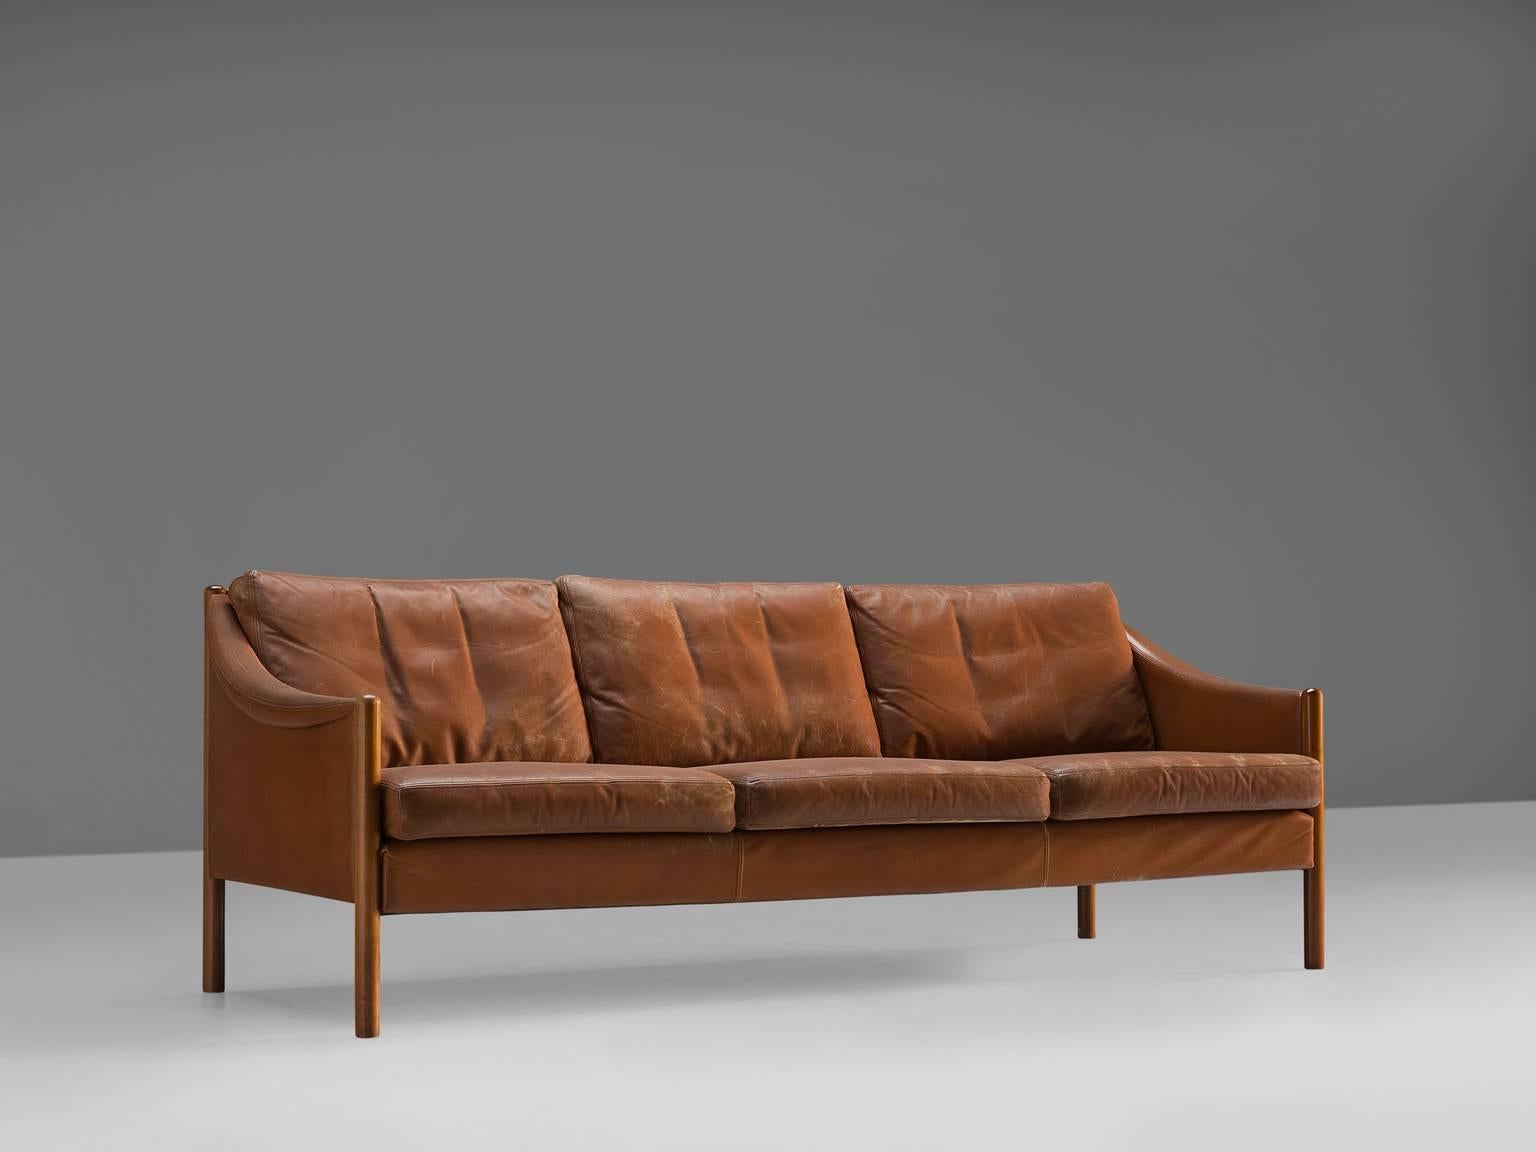 Settee, in leather and wood, Denmark, 1963.

Sofa with an elegant design in the style of Børge Mogensen. This sofa has a low, curved back, which smoothly runs over into the armrests with detailed piping. Seating and back feature dawn filled